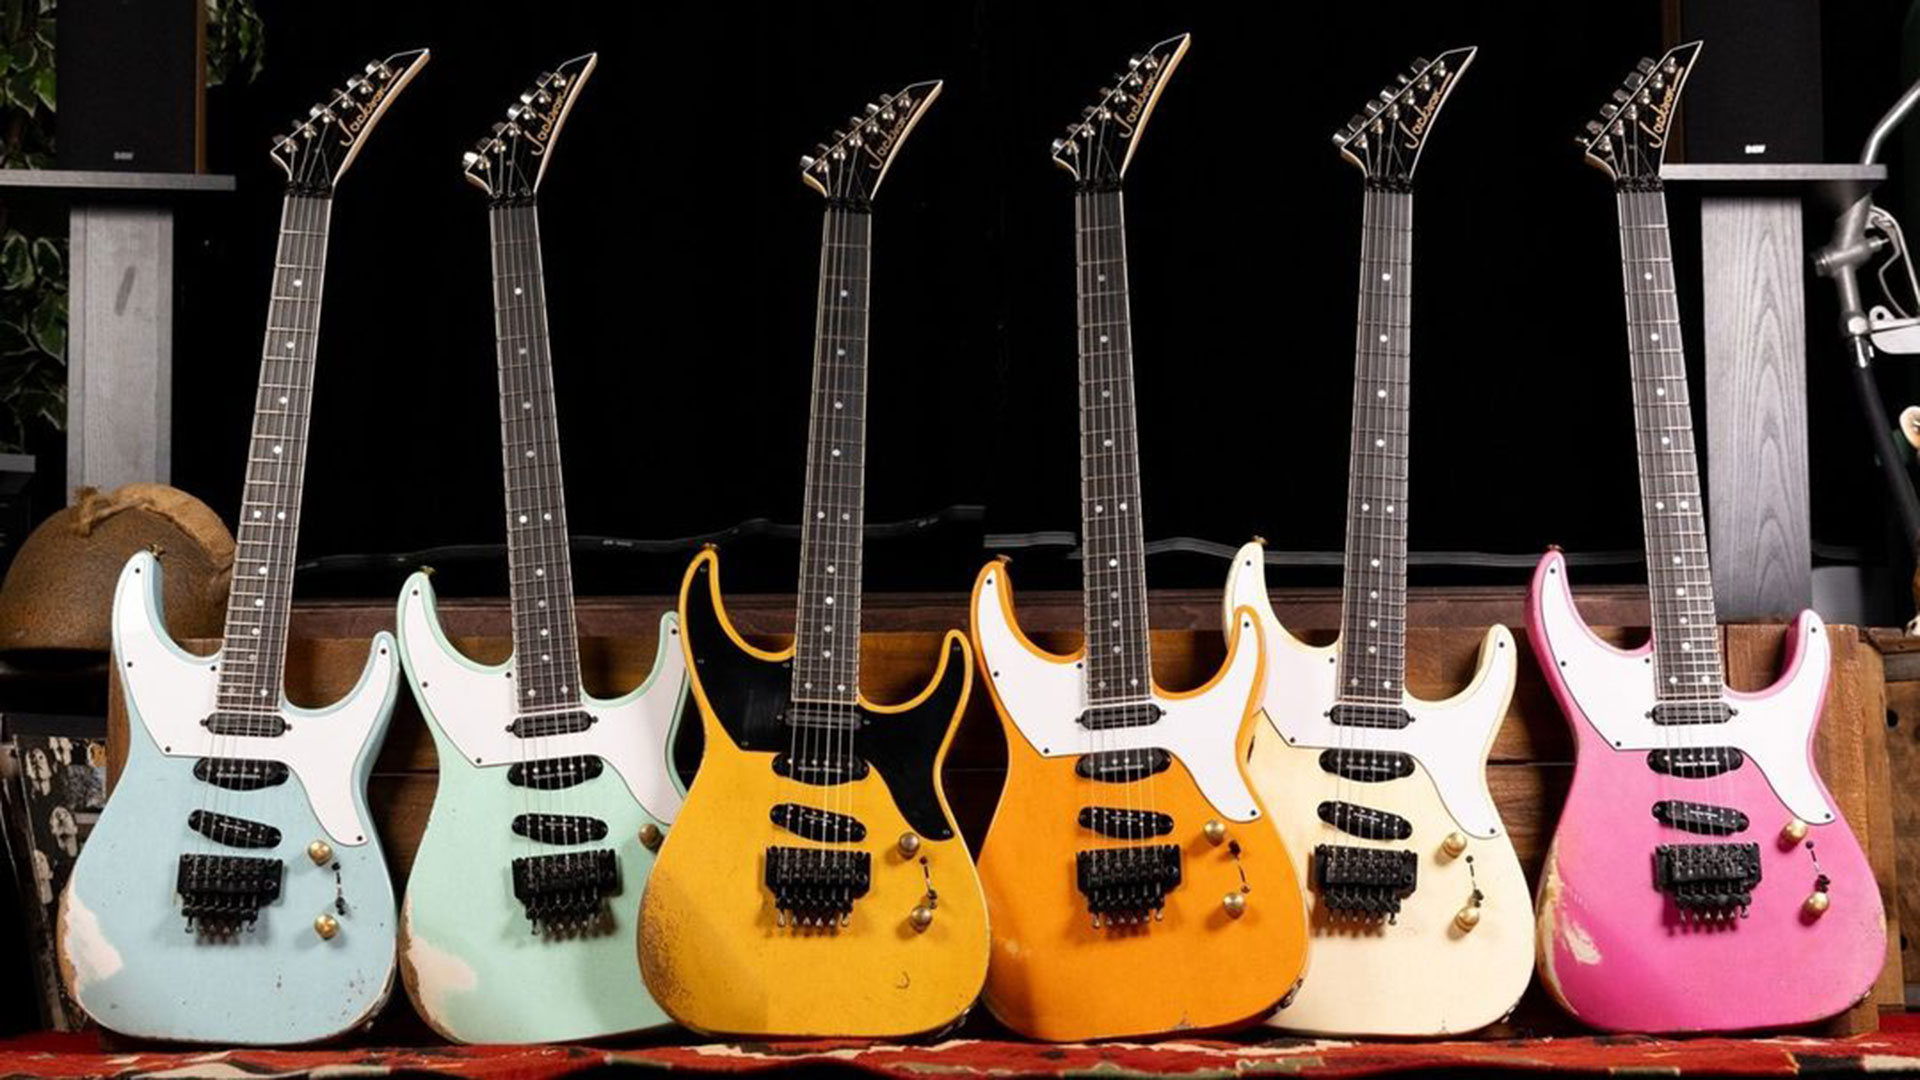 Jackson has reprised a cult electric guitar associated…